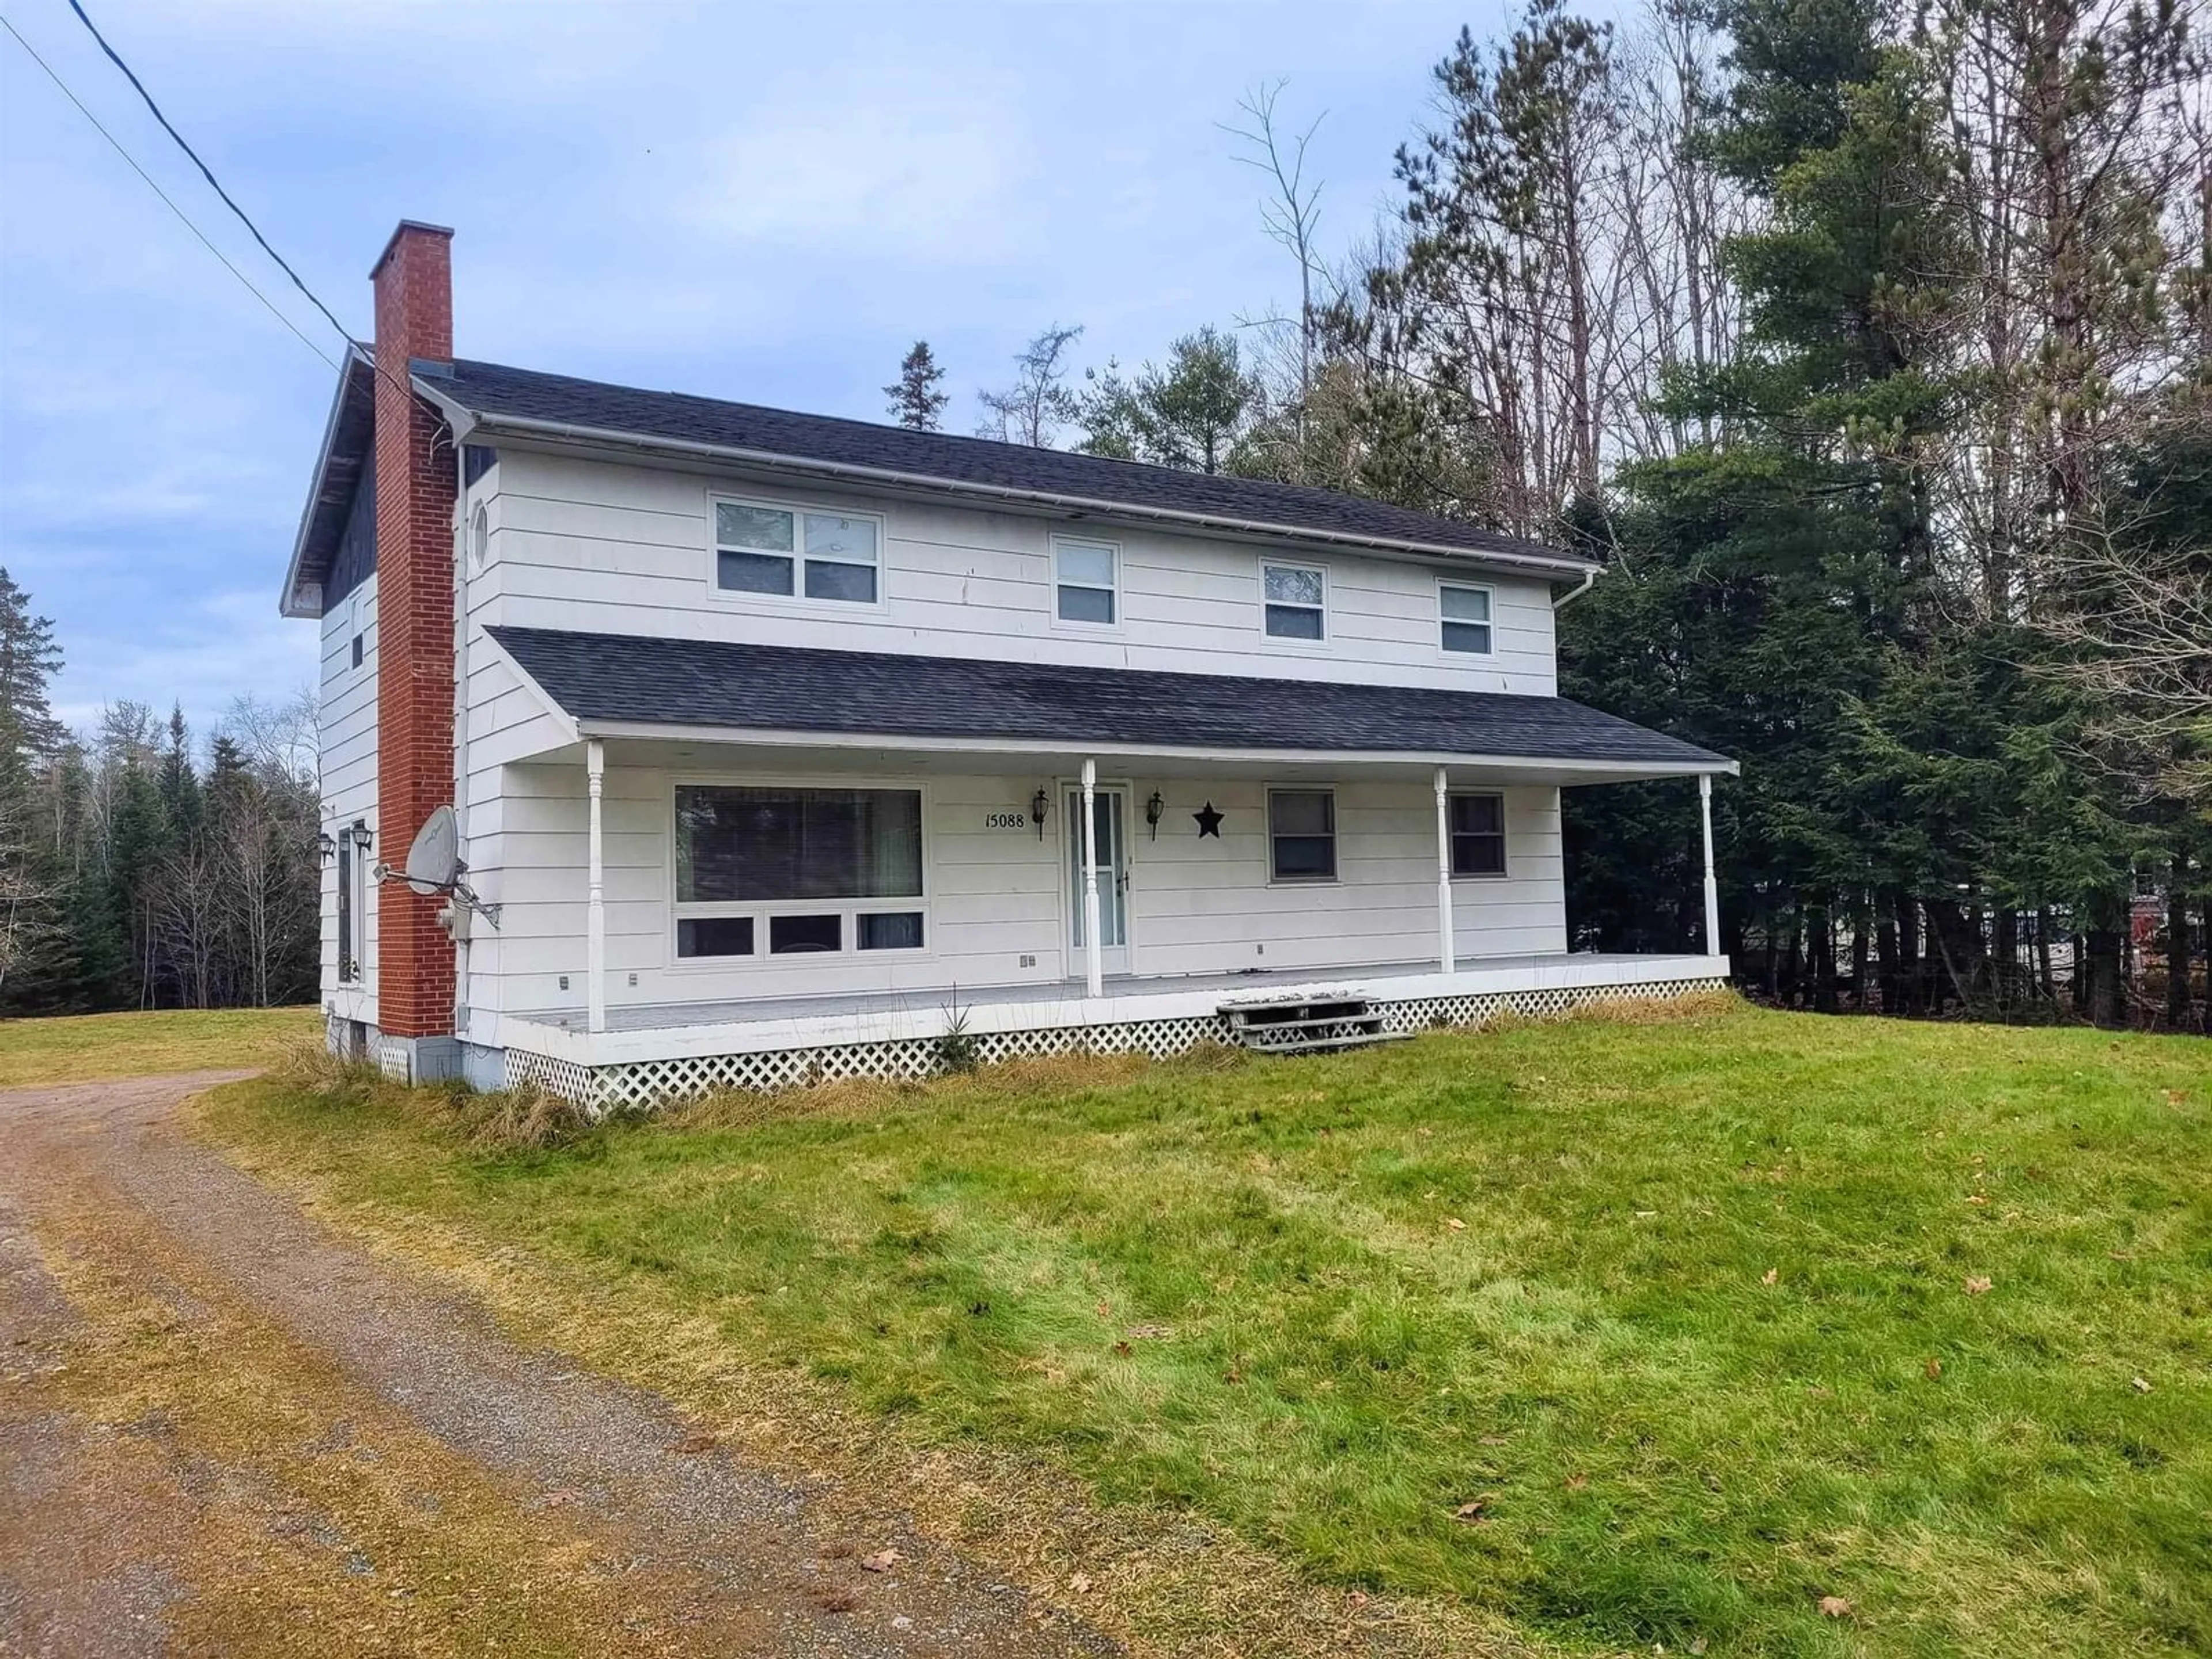 Home with unknown exterior material for 15088 Highway 224, Cooks Brook Nova Scotia B0N 2H0